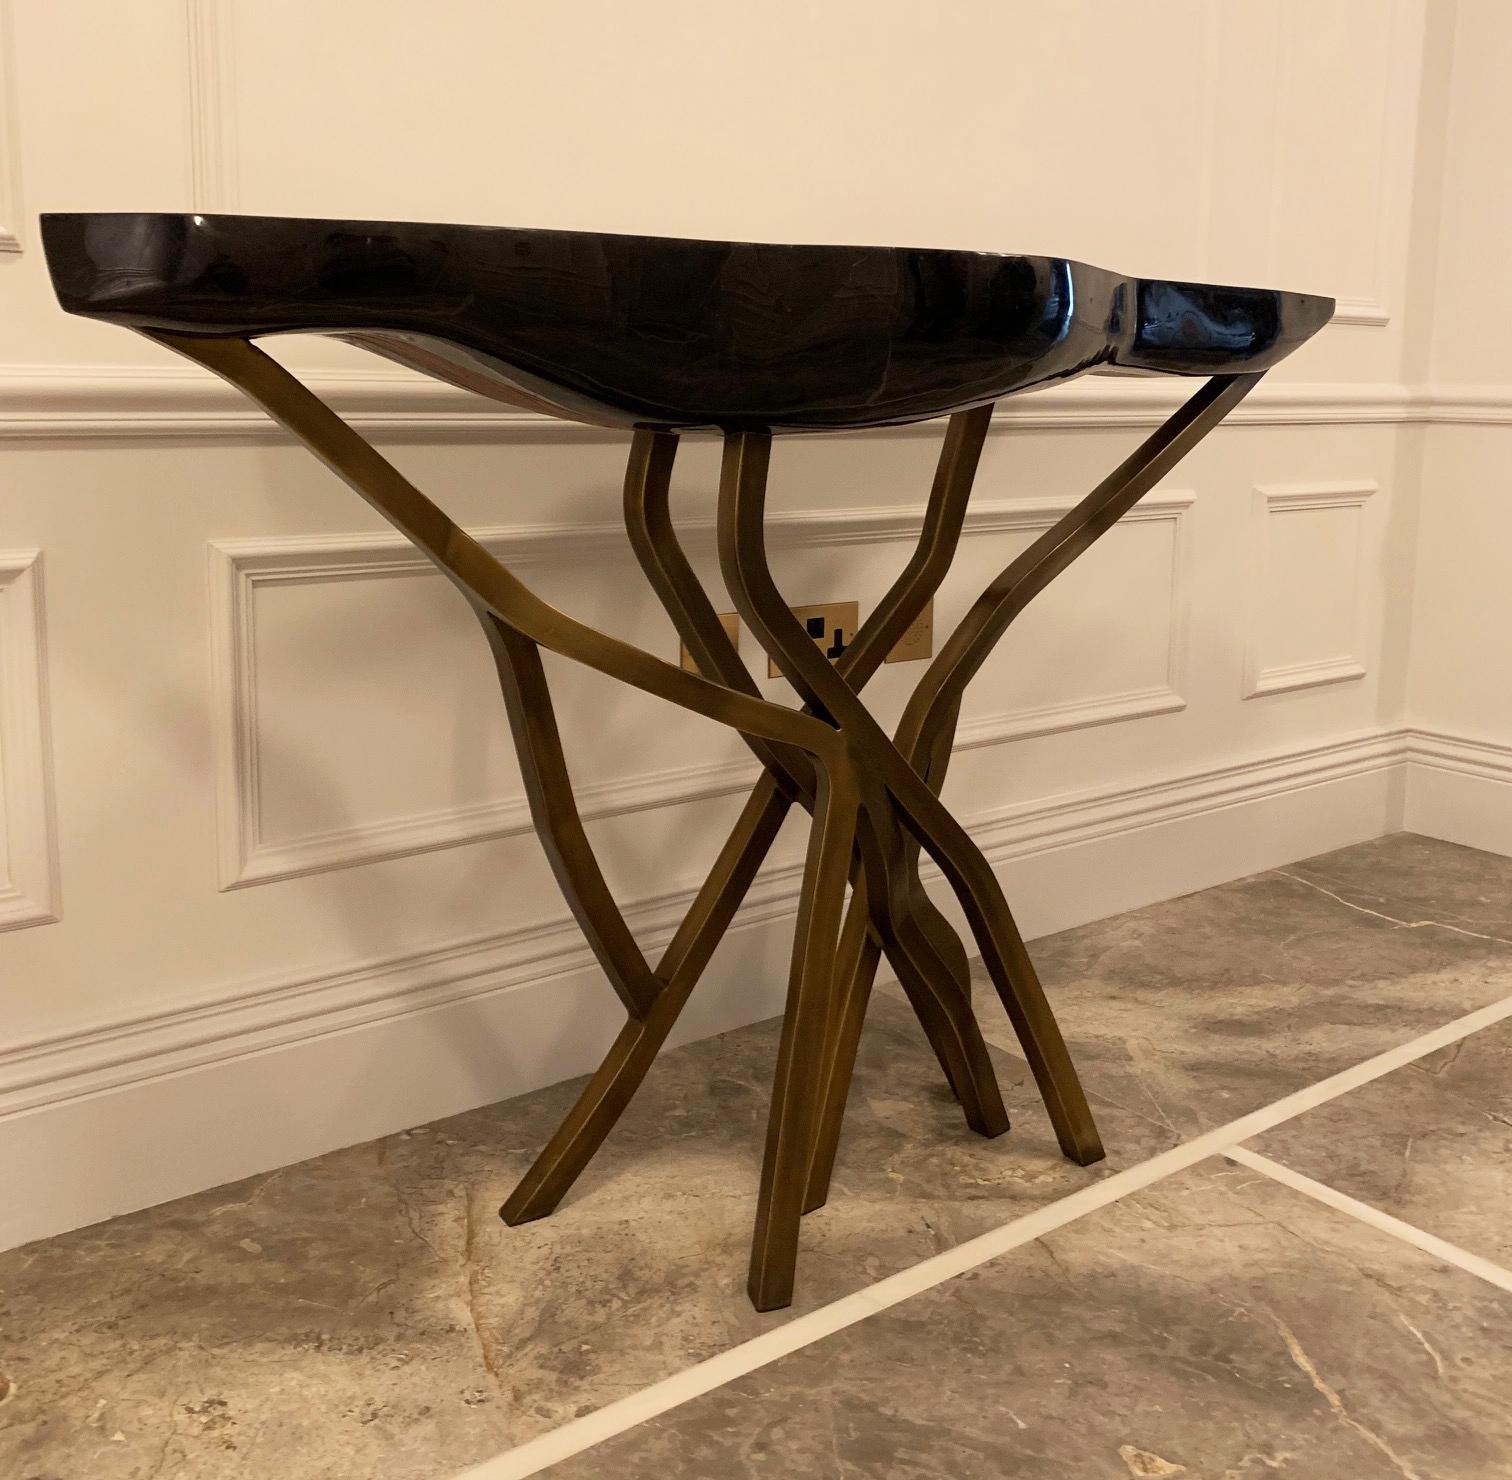 A French 'contemporary design' sculptural console table...

This stunning piece of functional art is designed and manufactured by the incomparable R&Y Augousti, France. The 'Acacia' console table features an organically shaped top; hand-crafted from